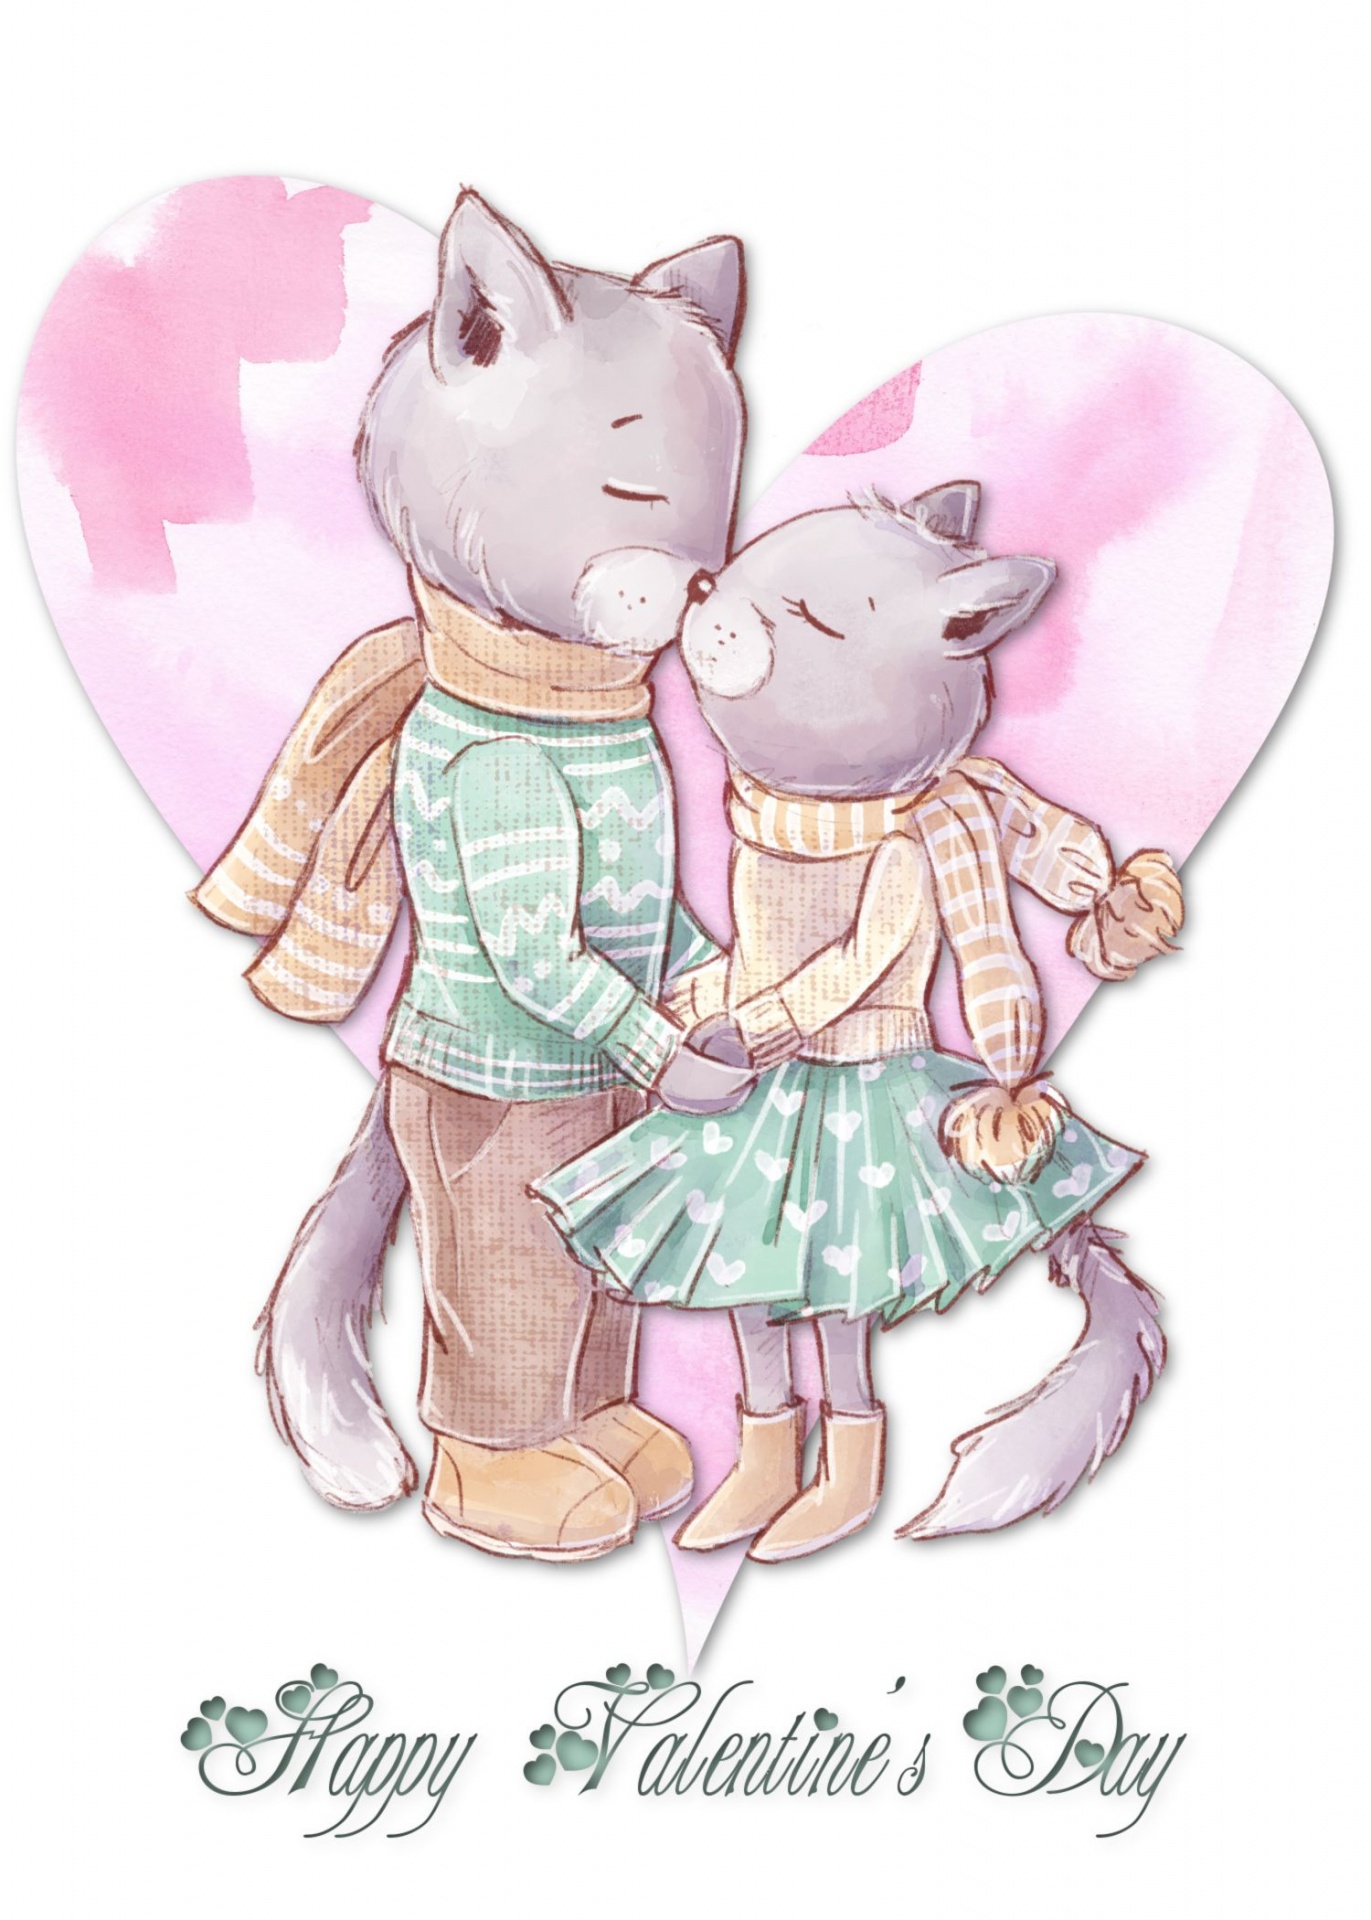 watercolor illustration of boy and girl cats in human clothing very much in love